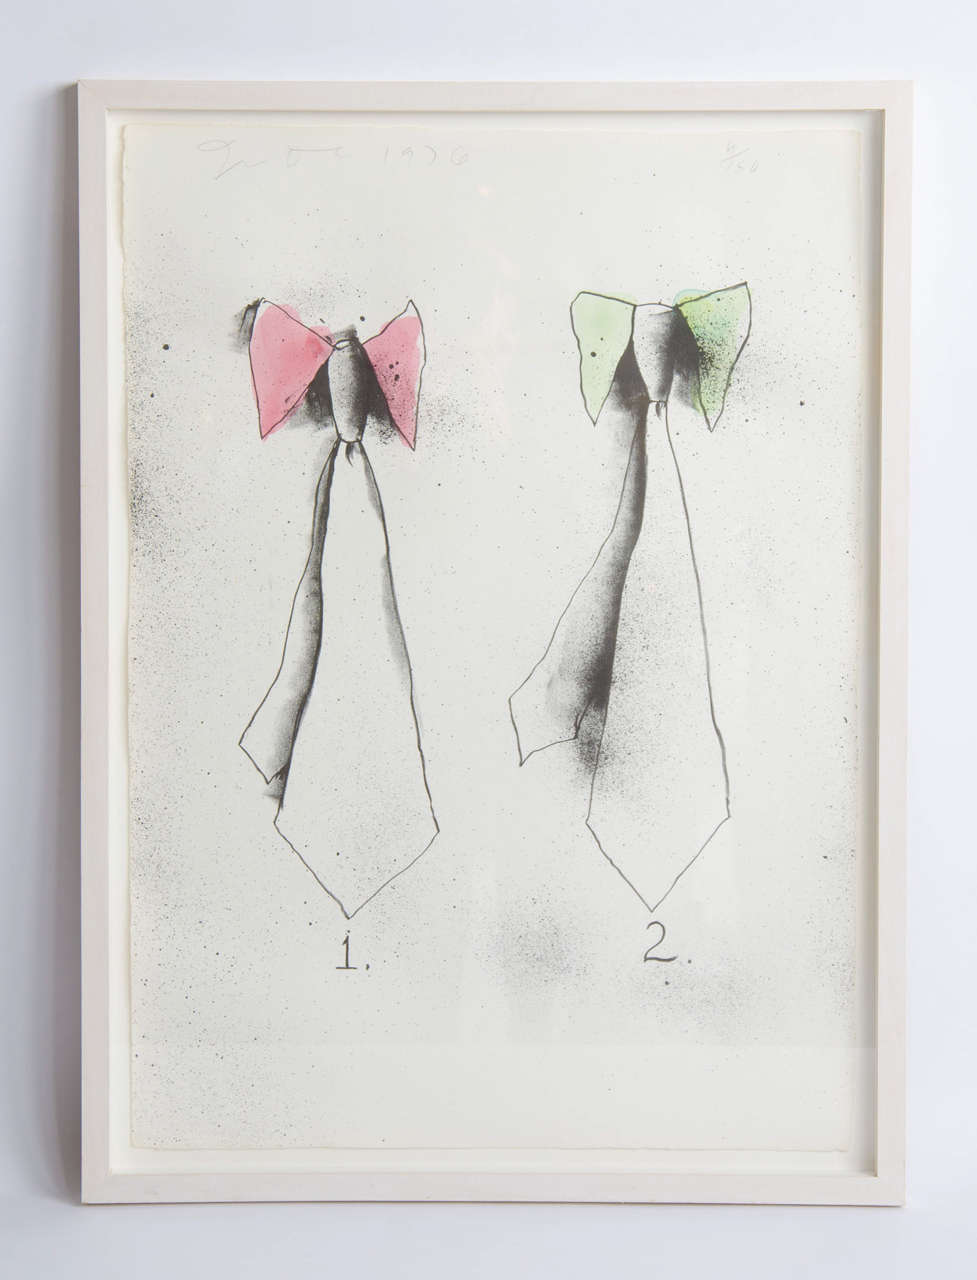 Jim Dine (b.1935) 'Ties',1970, ed 4 of 150, Lithograph, signed 79 x 56 cm.